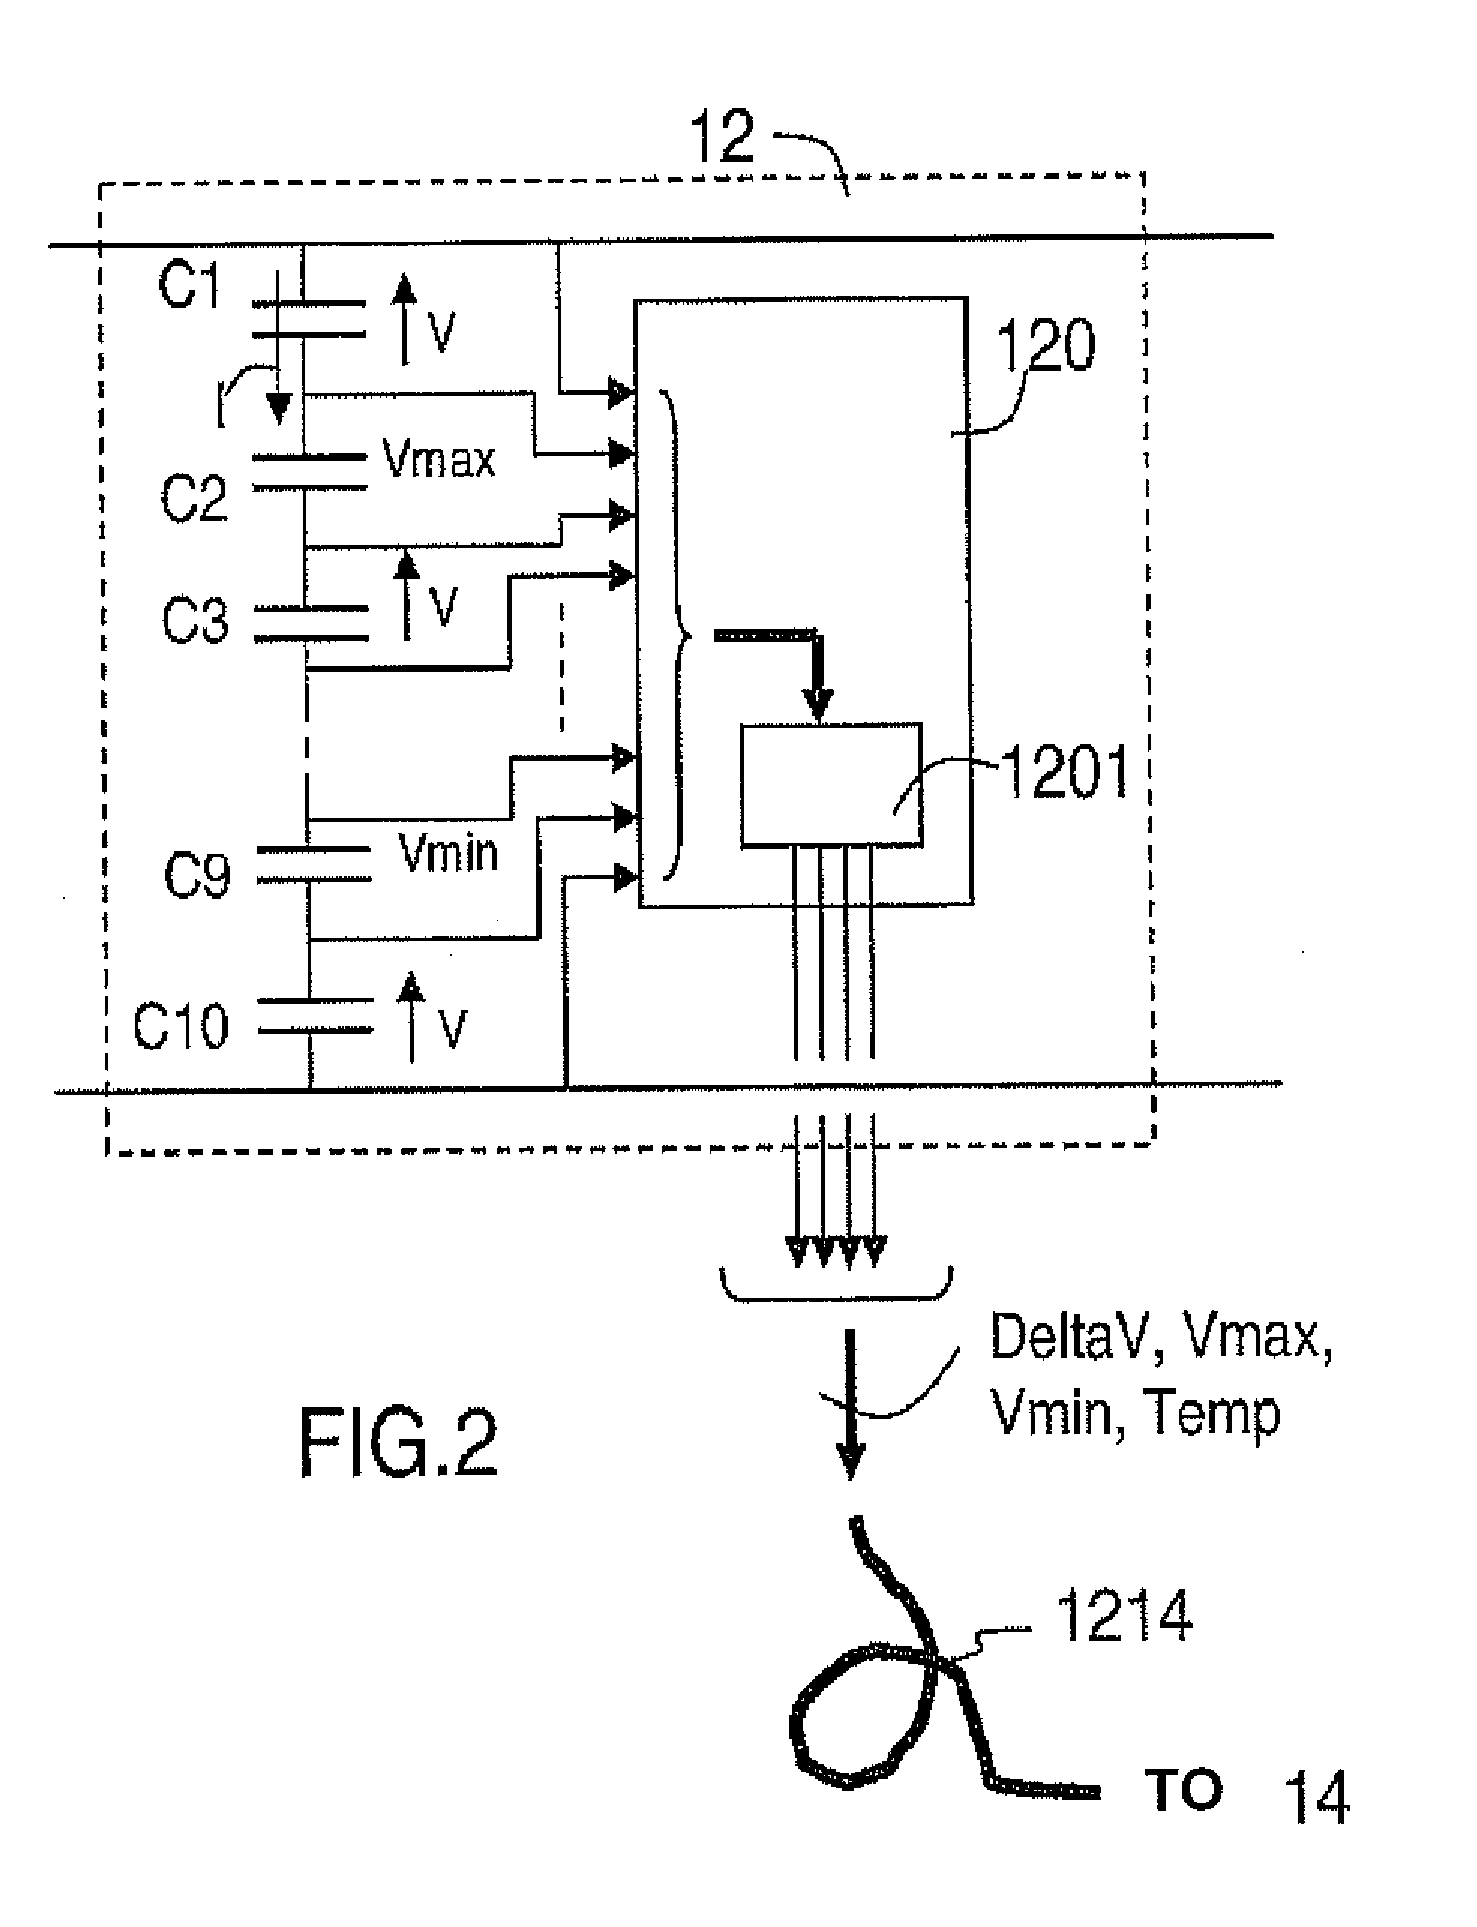 Method for driving a micro-hybrid system for vehicle and an energy storage unit, and hybrid system for implementing same